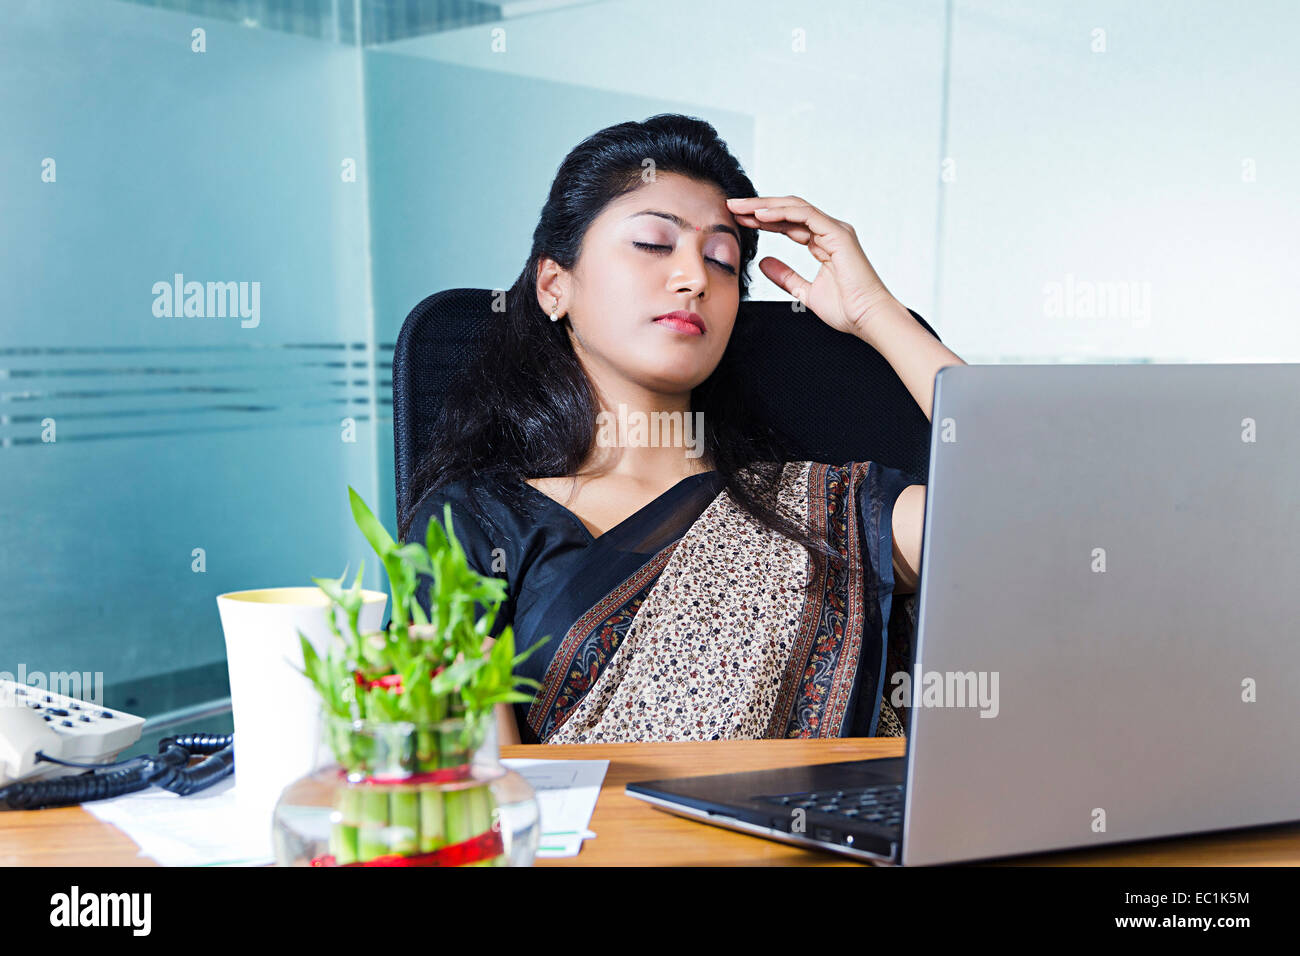 Indian Business donna lo stress Foto Stock